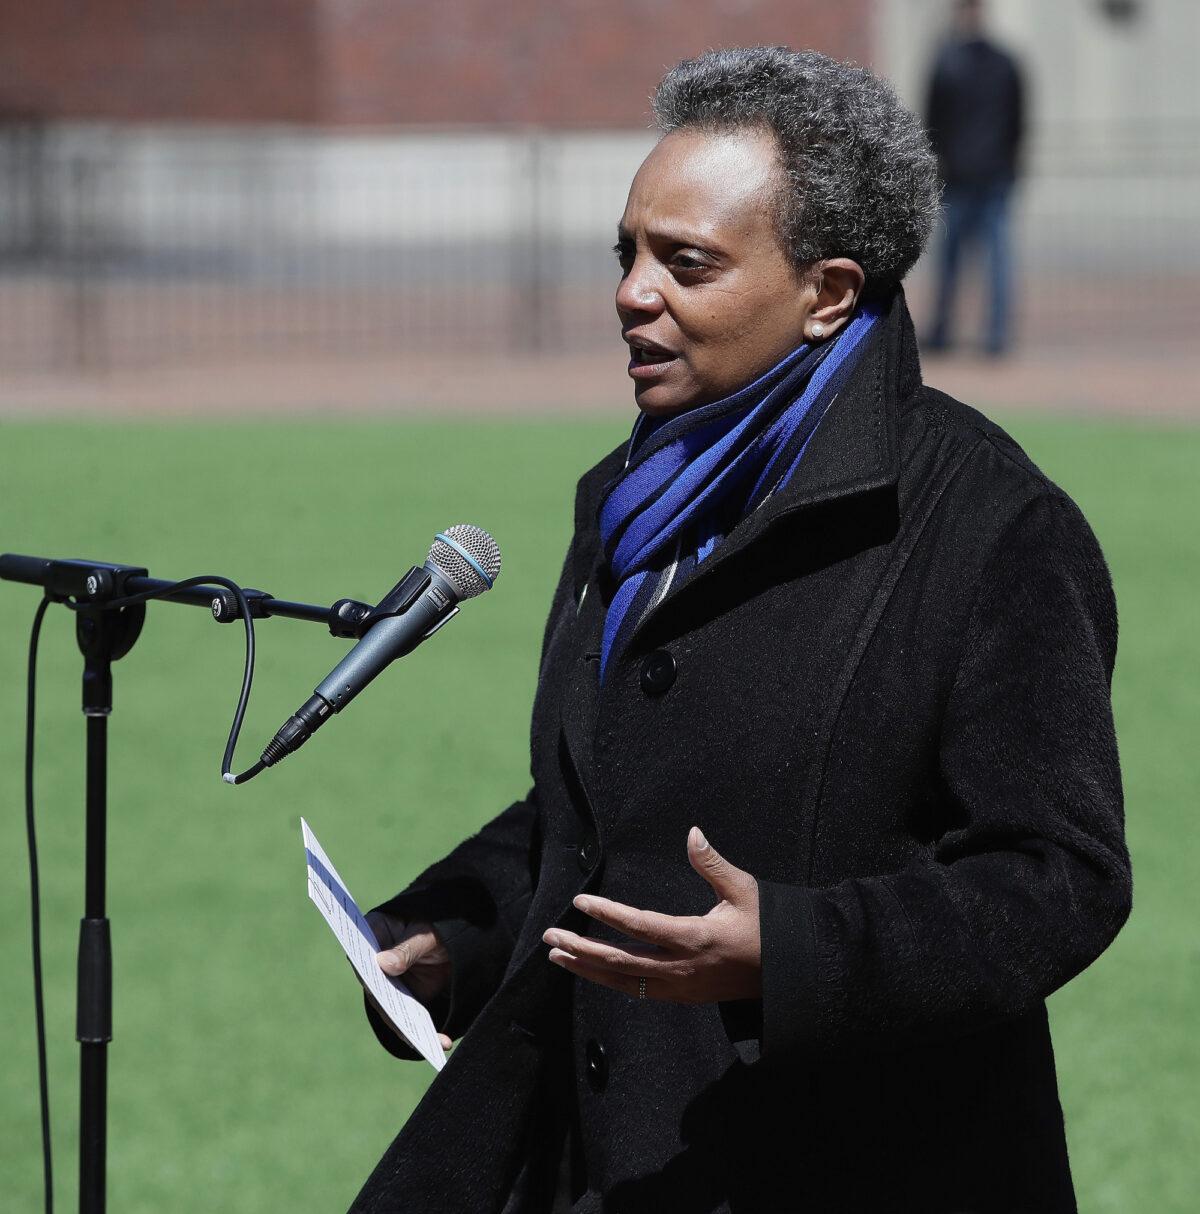 Chicago Mayor Lori Lightfoot speaks during a press conference in Chicago, Ill., on April 16, 2020. (Jonathan Daniel/Getty Images)